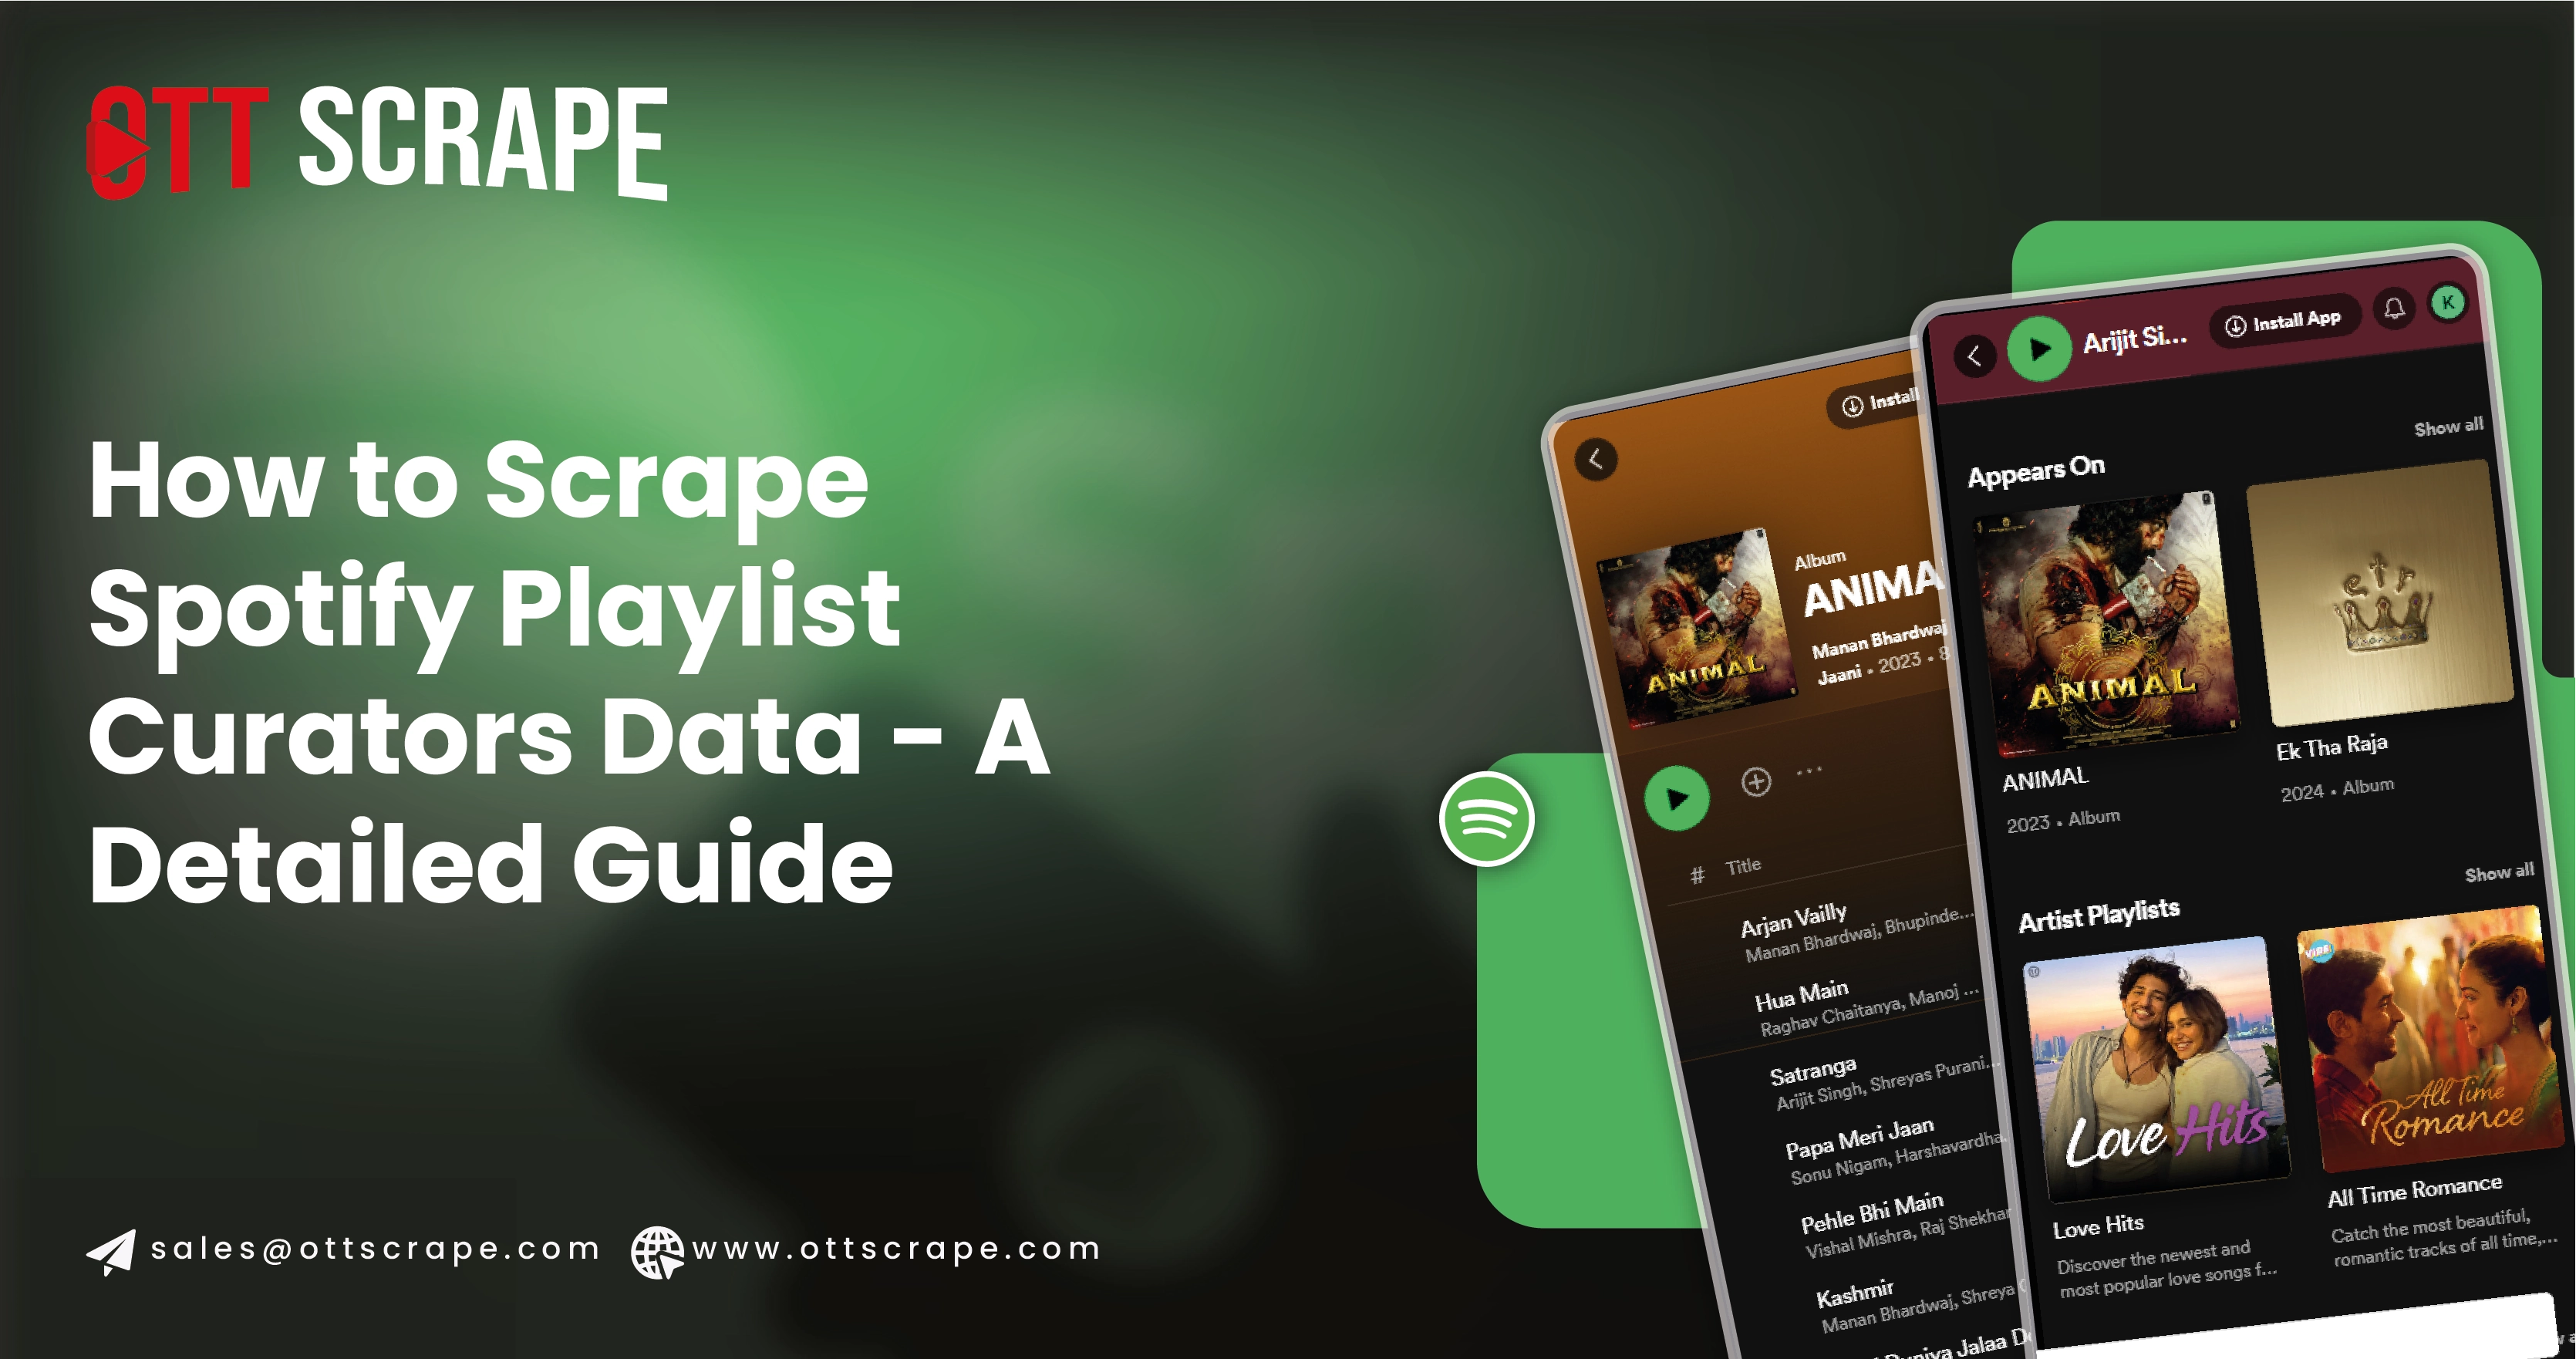 How-to-Scrape-Spotify-Playlist-Curators-Data-A-Detailed-Guide-01